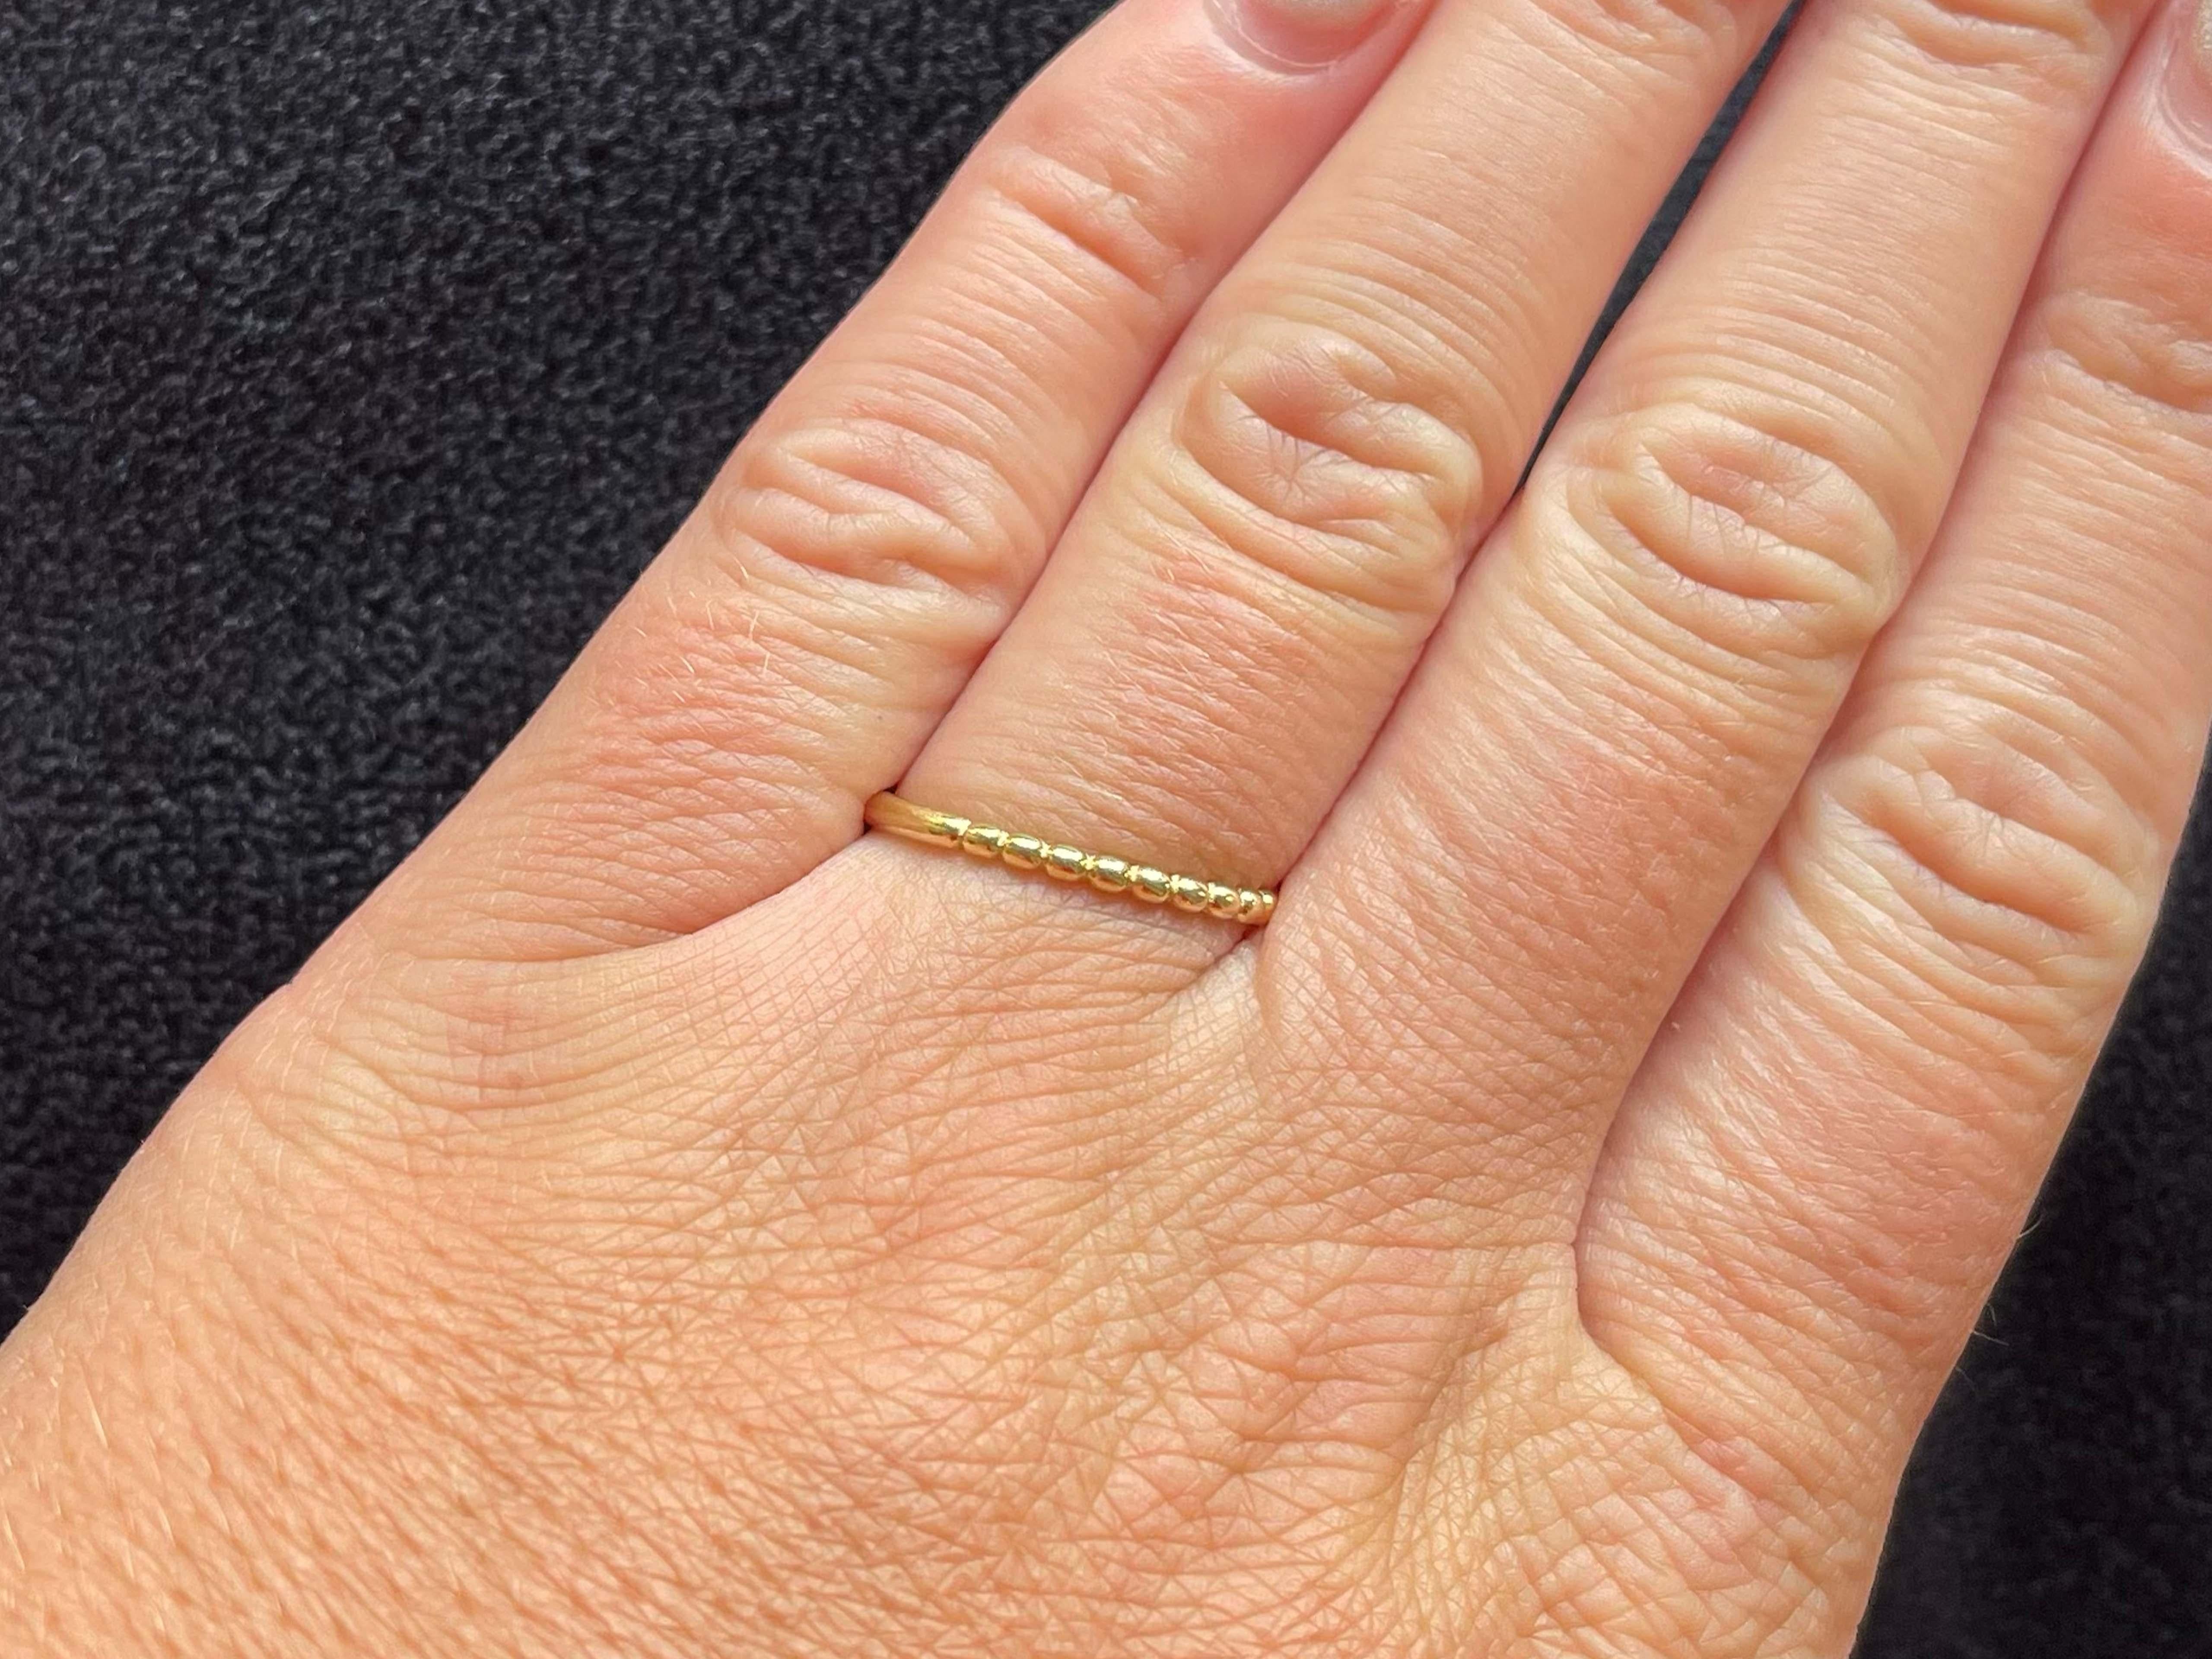 Item Specifications:

Metal: 18K Yellow Gold

Ring Size: 8

Total Weight: 1.1 Grams

Condition: Preowned, excellent

Stamped: 